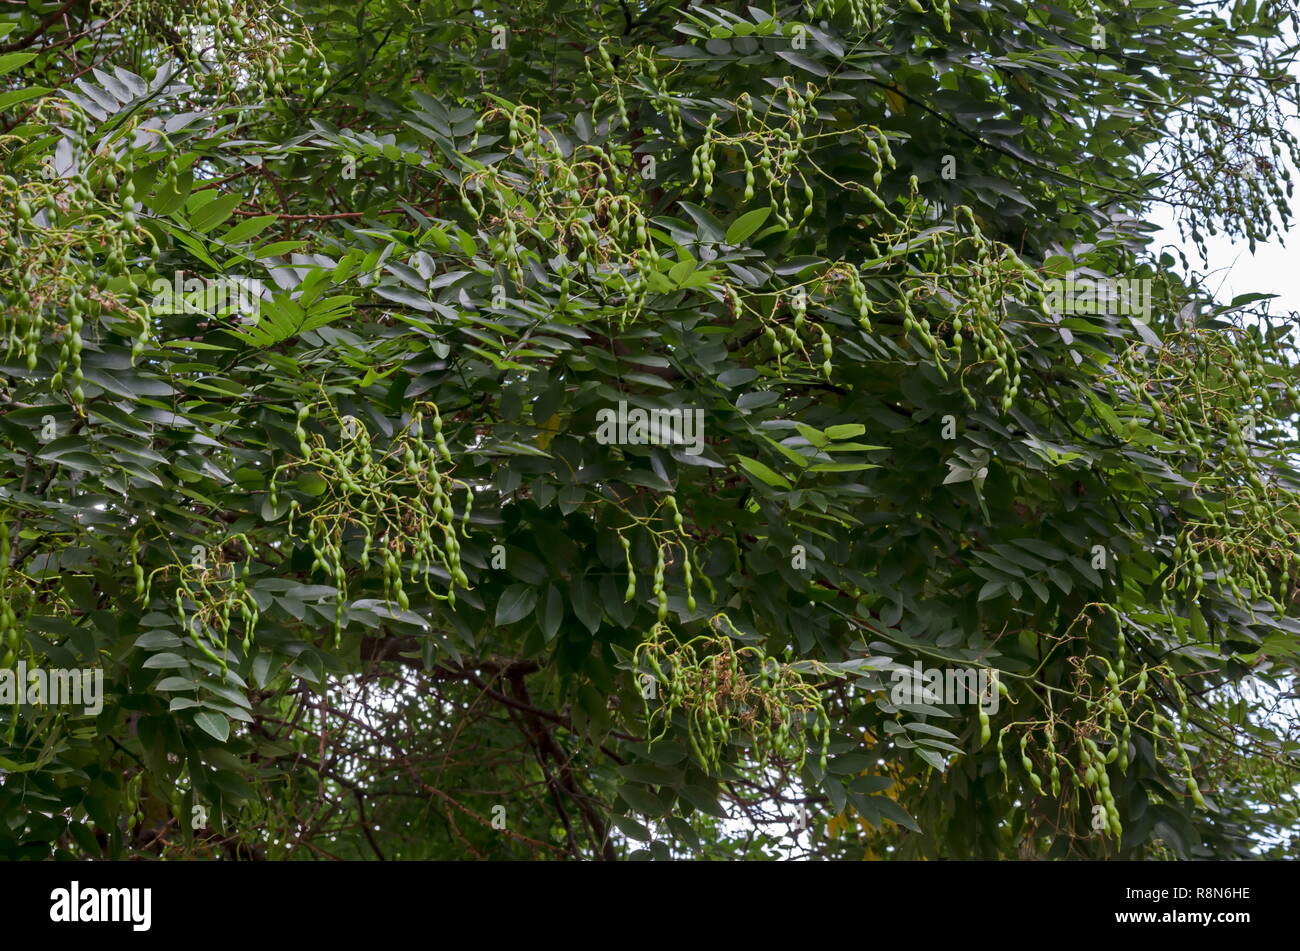 View of Japanese pagoda tree, Acacia, Styphnolobium japonicum or Sophora japonica  with pinnate compound leaves and  interesting fruits, town Delchevo Stock Photo